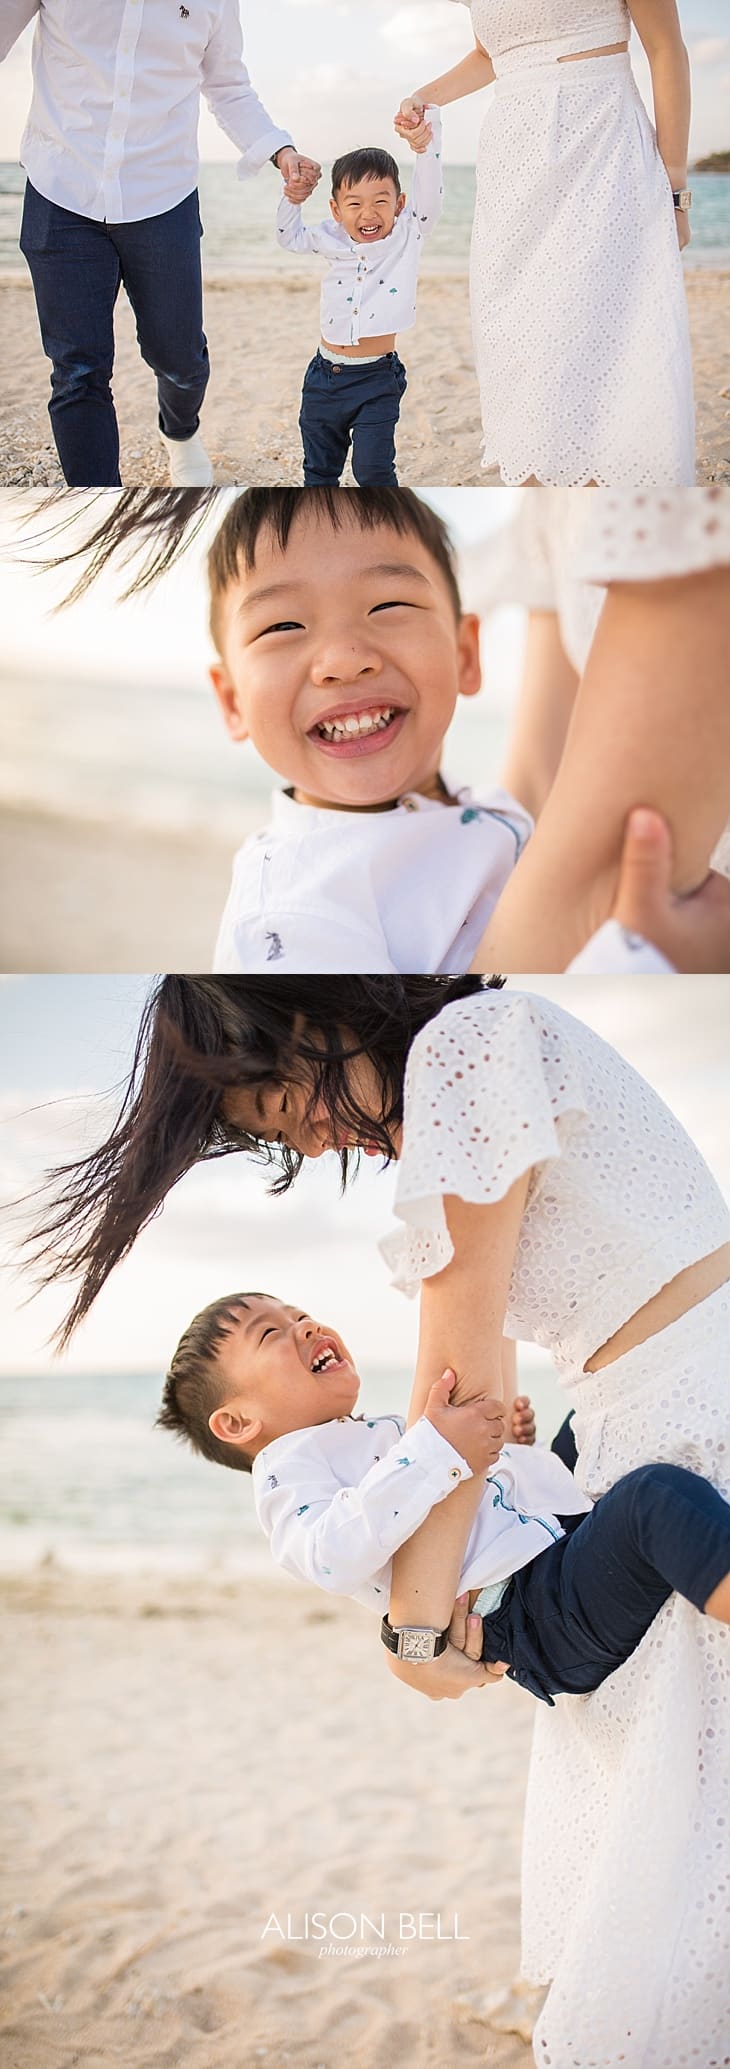 Okinawa travel family photography by Alison Bell, Photographer